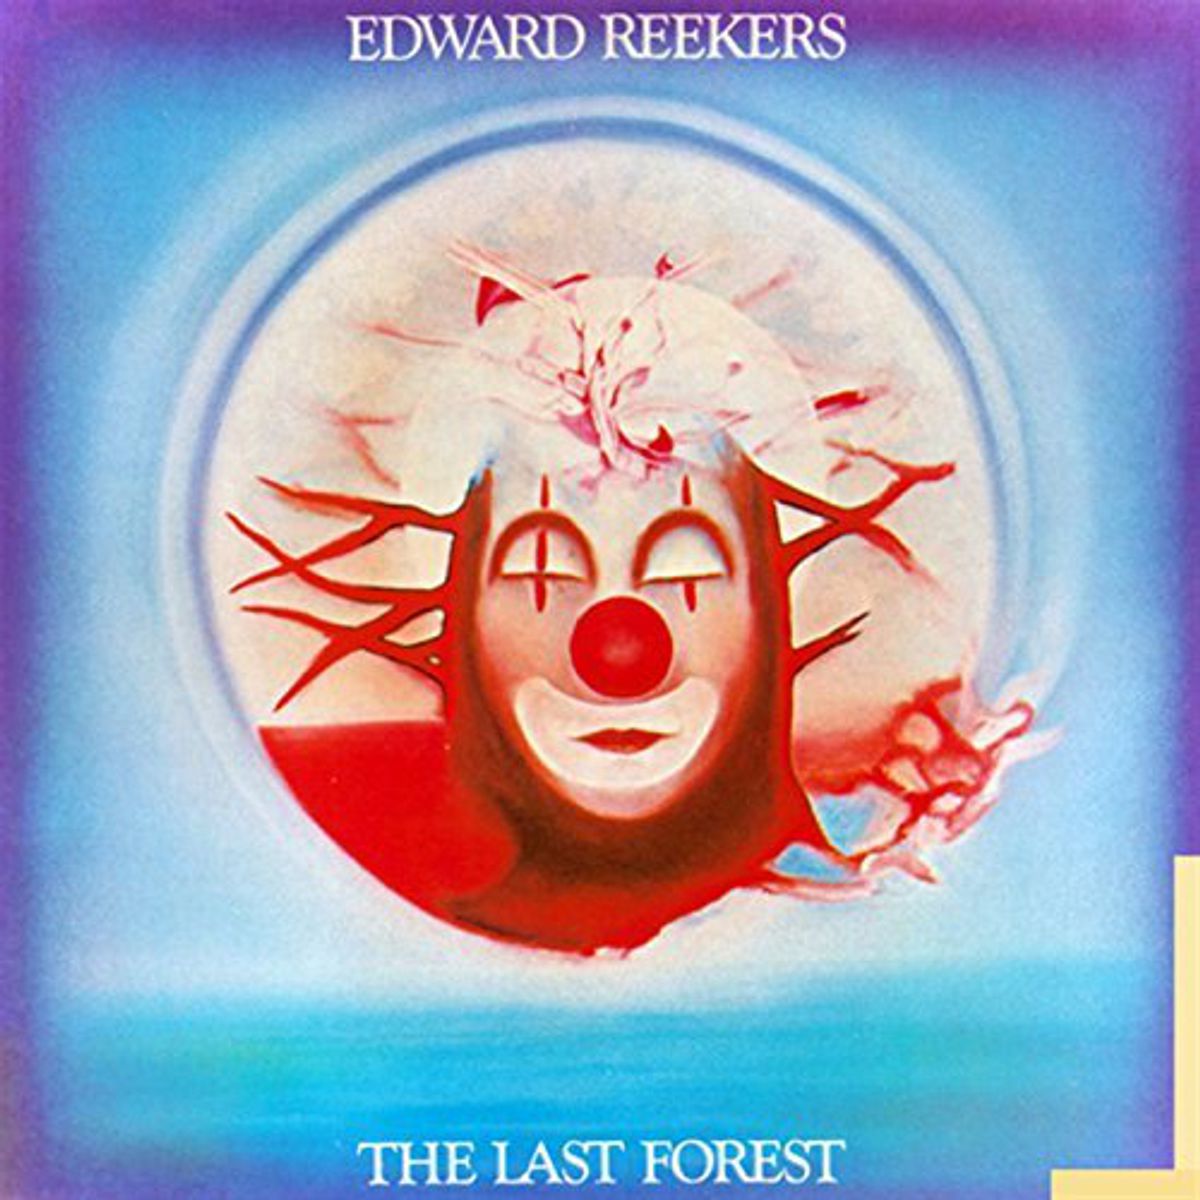 Edward Reekers - 'The Last forest'